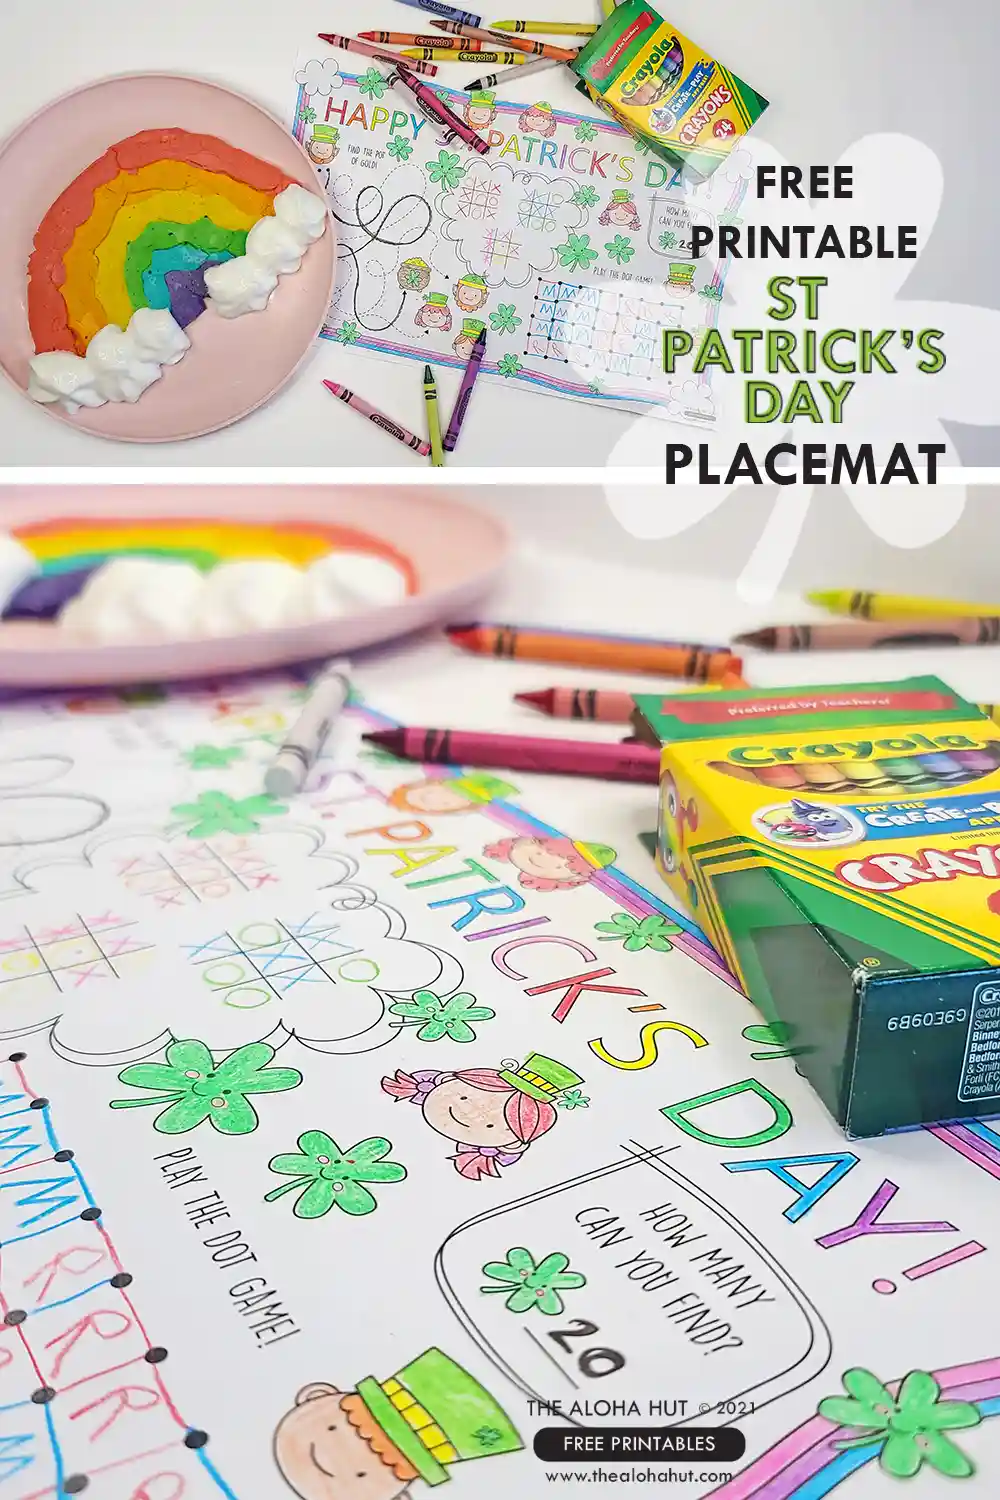 St. Patrick's Day printable placemat, coloring page, and activity sheet for kids. Download our St. Patrick's Day coloring page for a fun placemat for your St. Patrick's Day rainbow themed breakfast or meal.